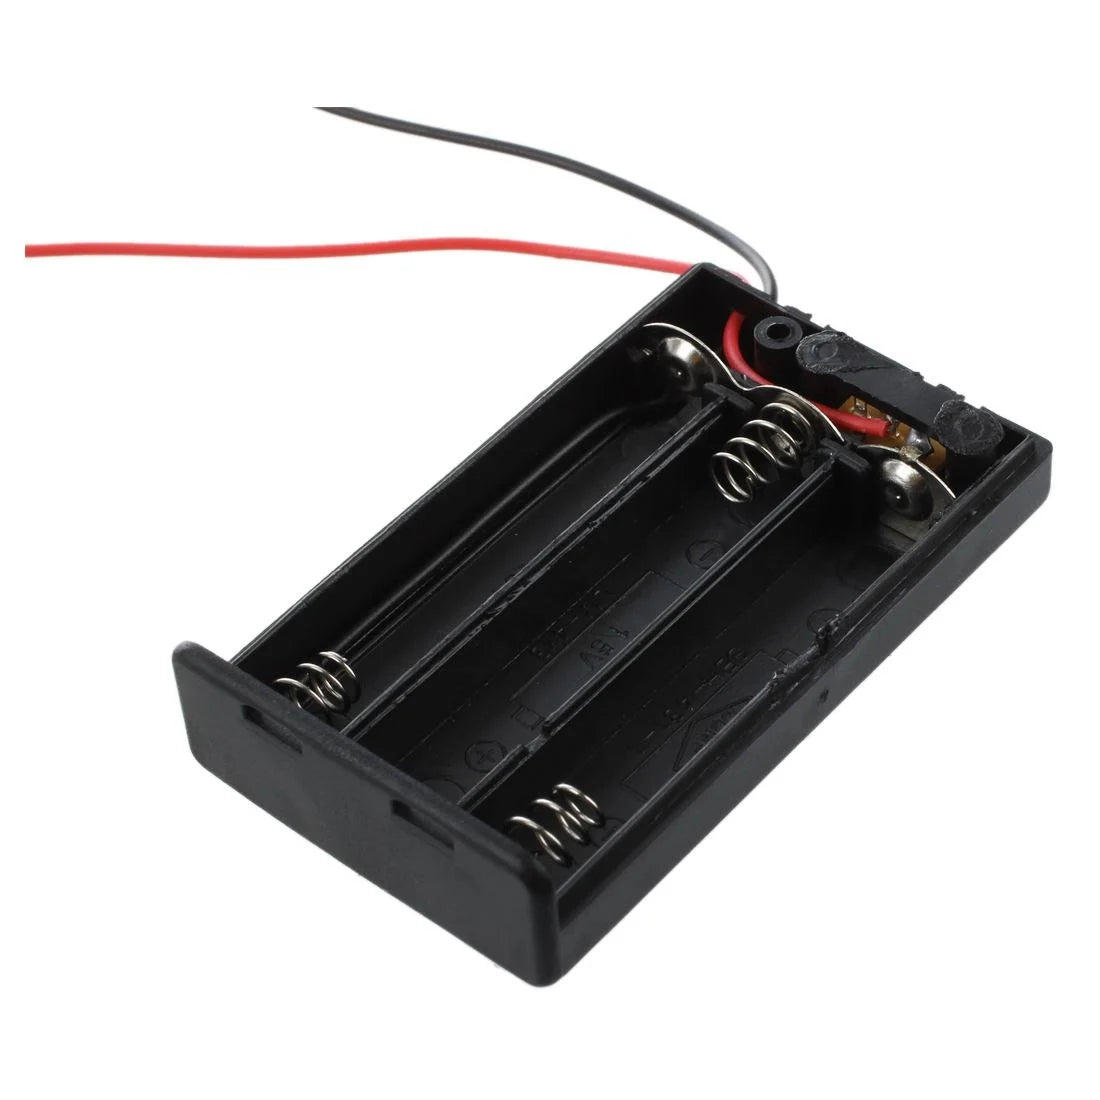 3 x 1.5V AAA battery holder with cover and On/Off Switch